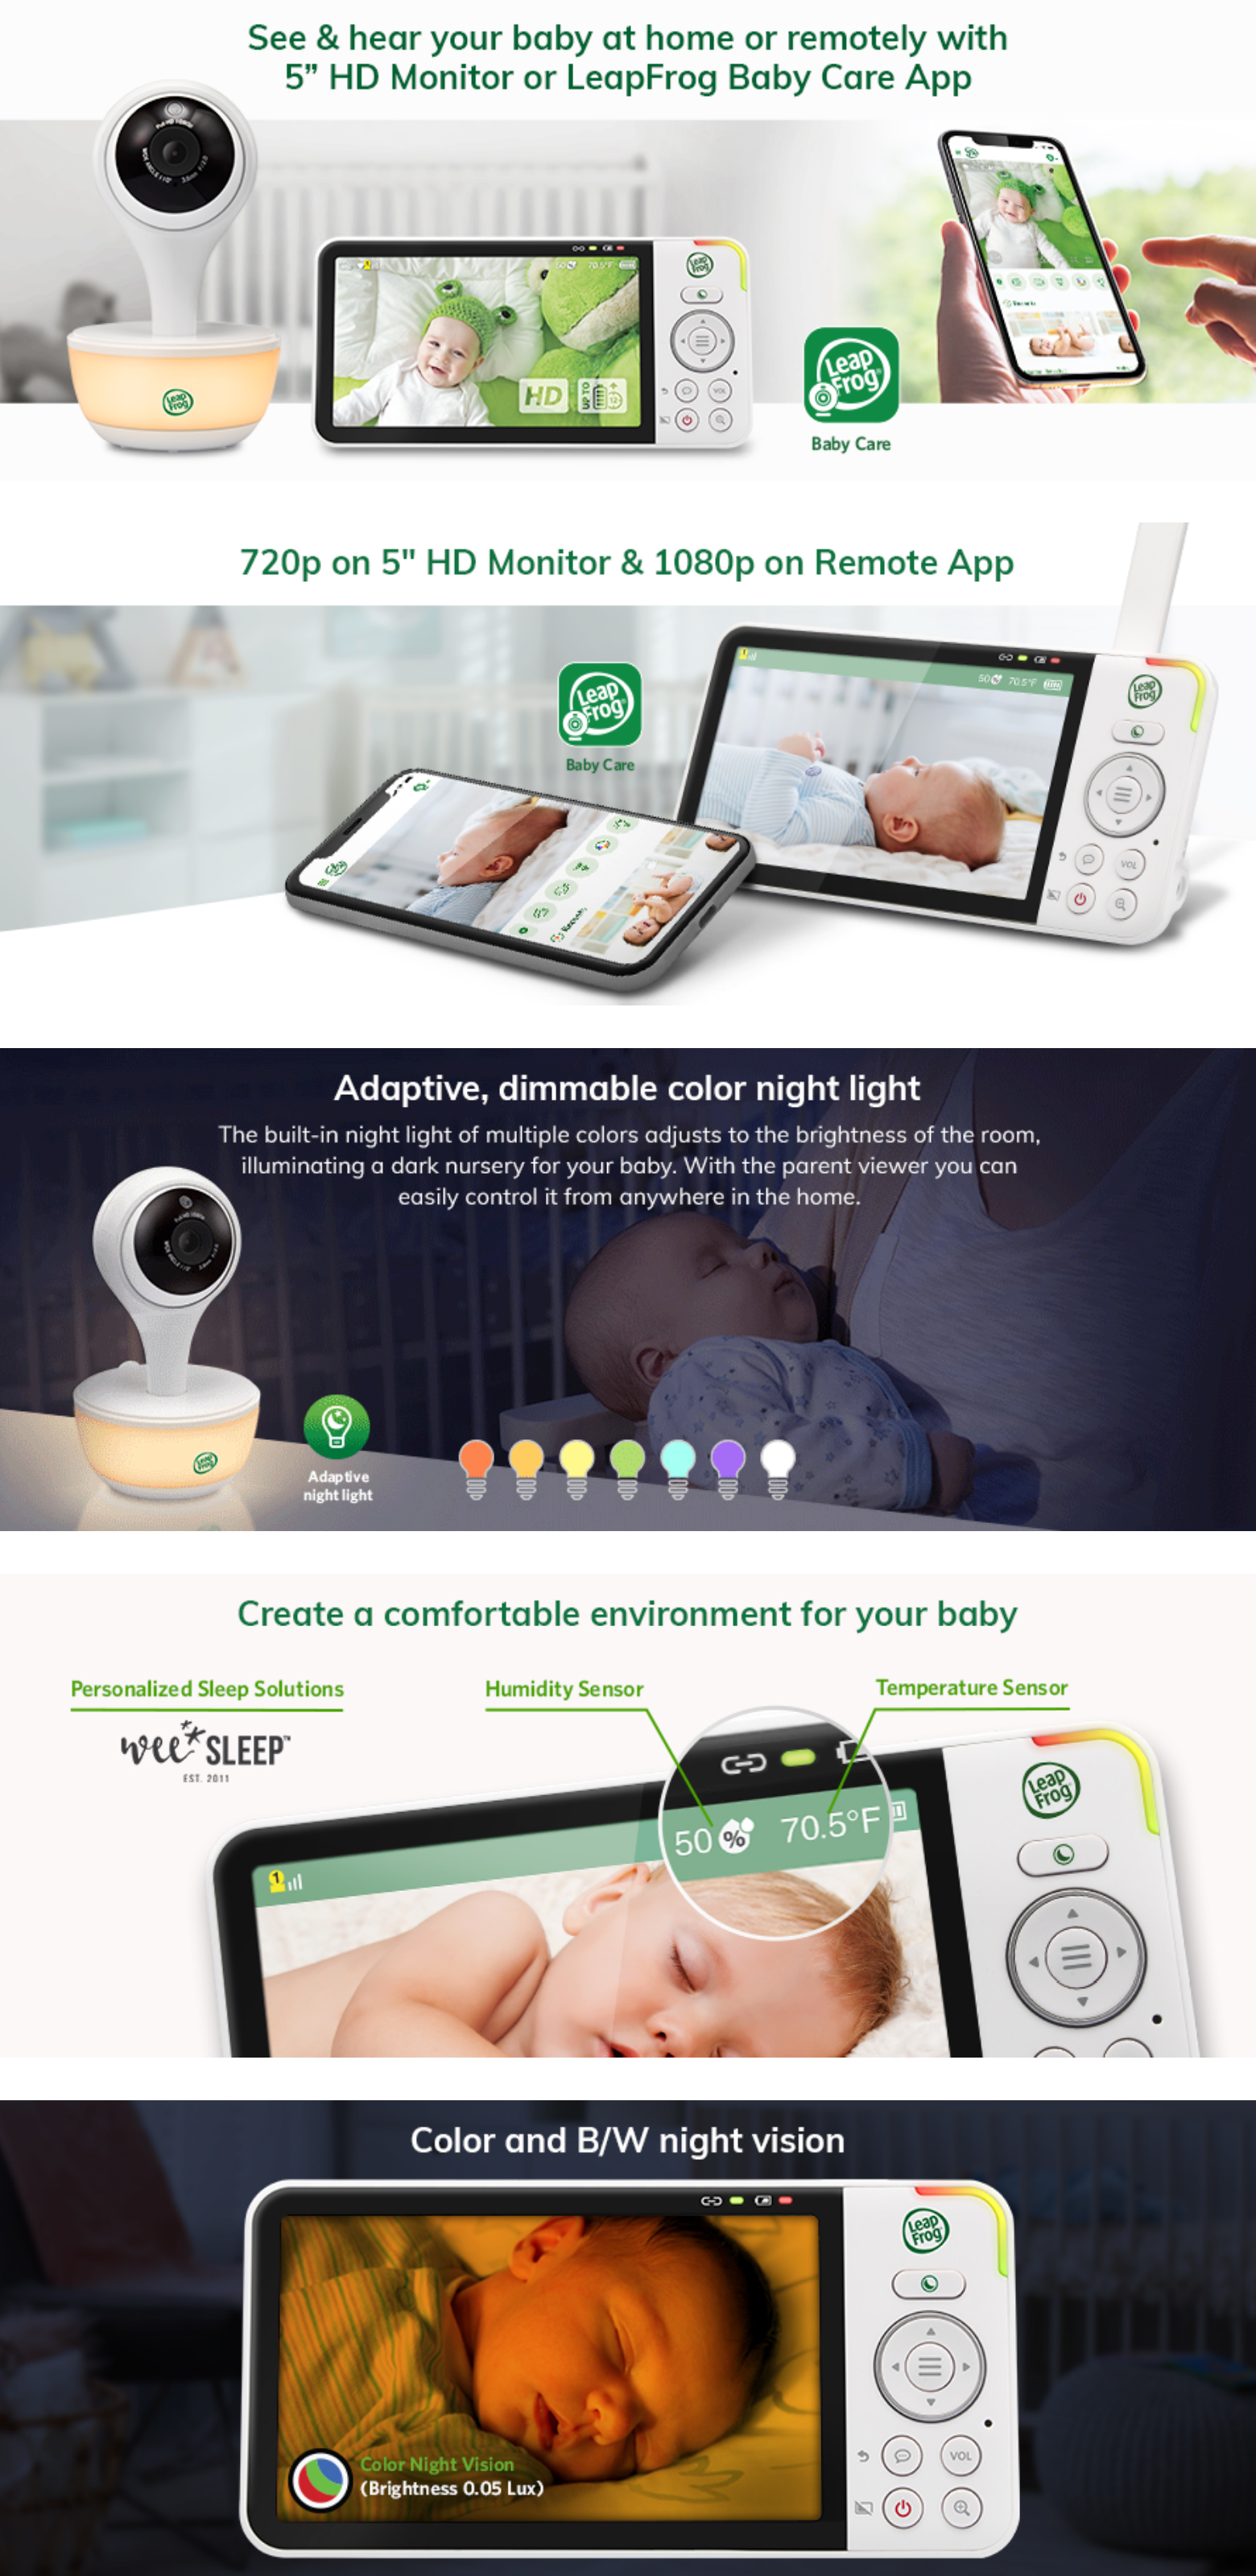 Baby-Monitors-LeapFrog-L815HD-2-2-Camera-HD-Video-with-Remote-Access-Baby-Monitor-1